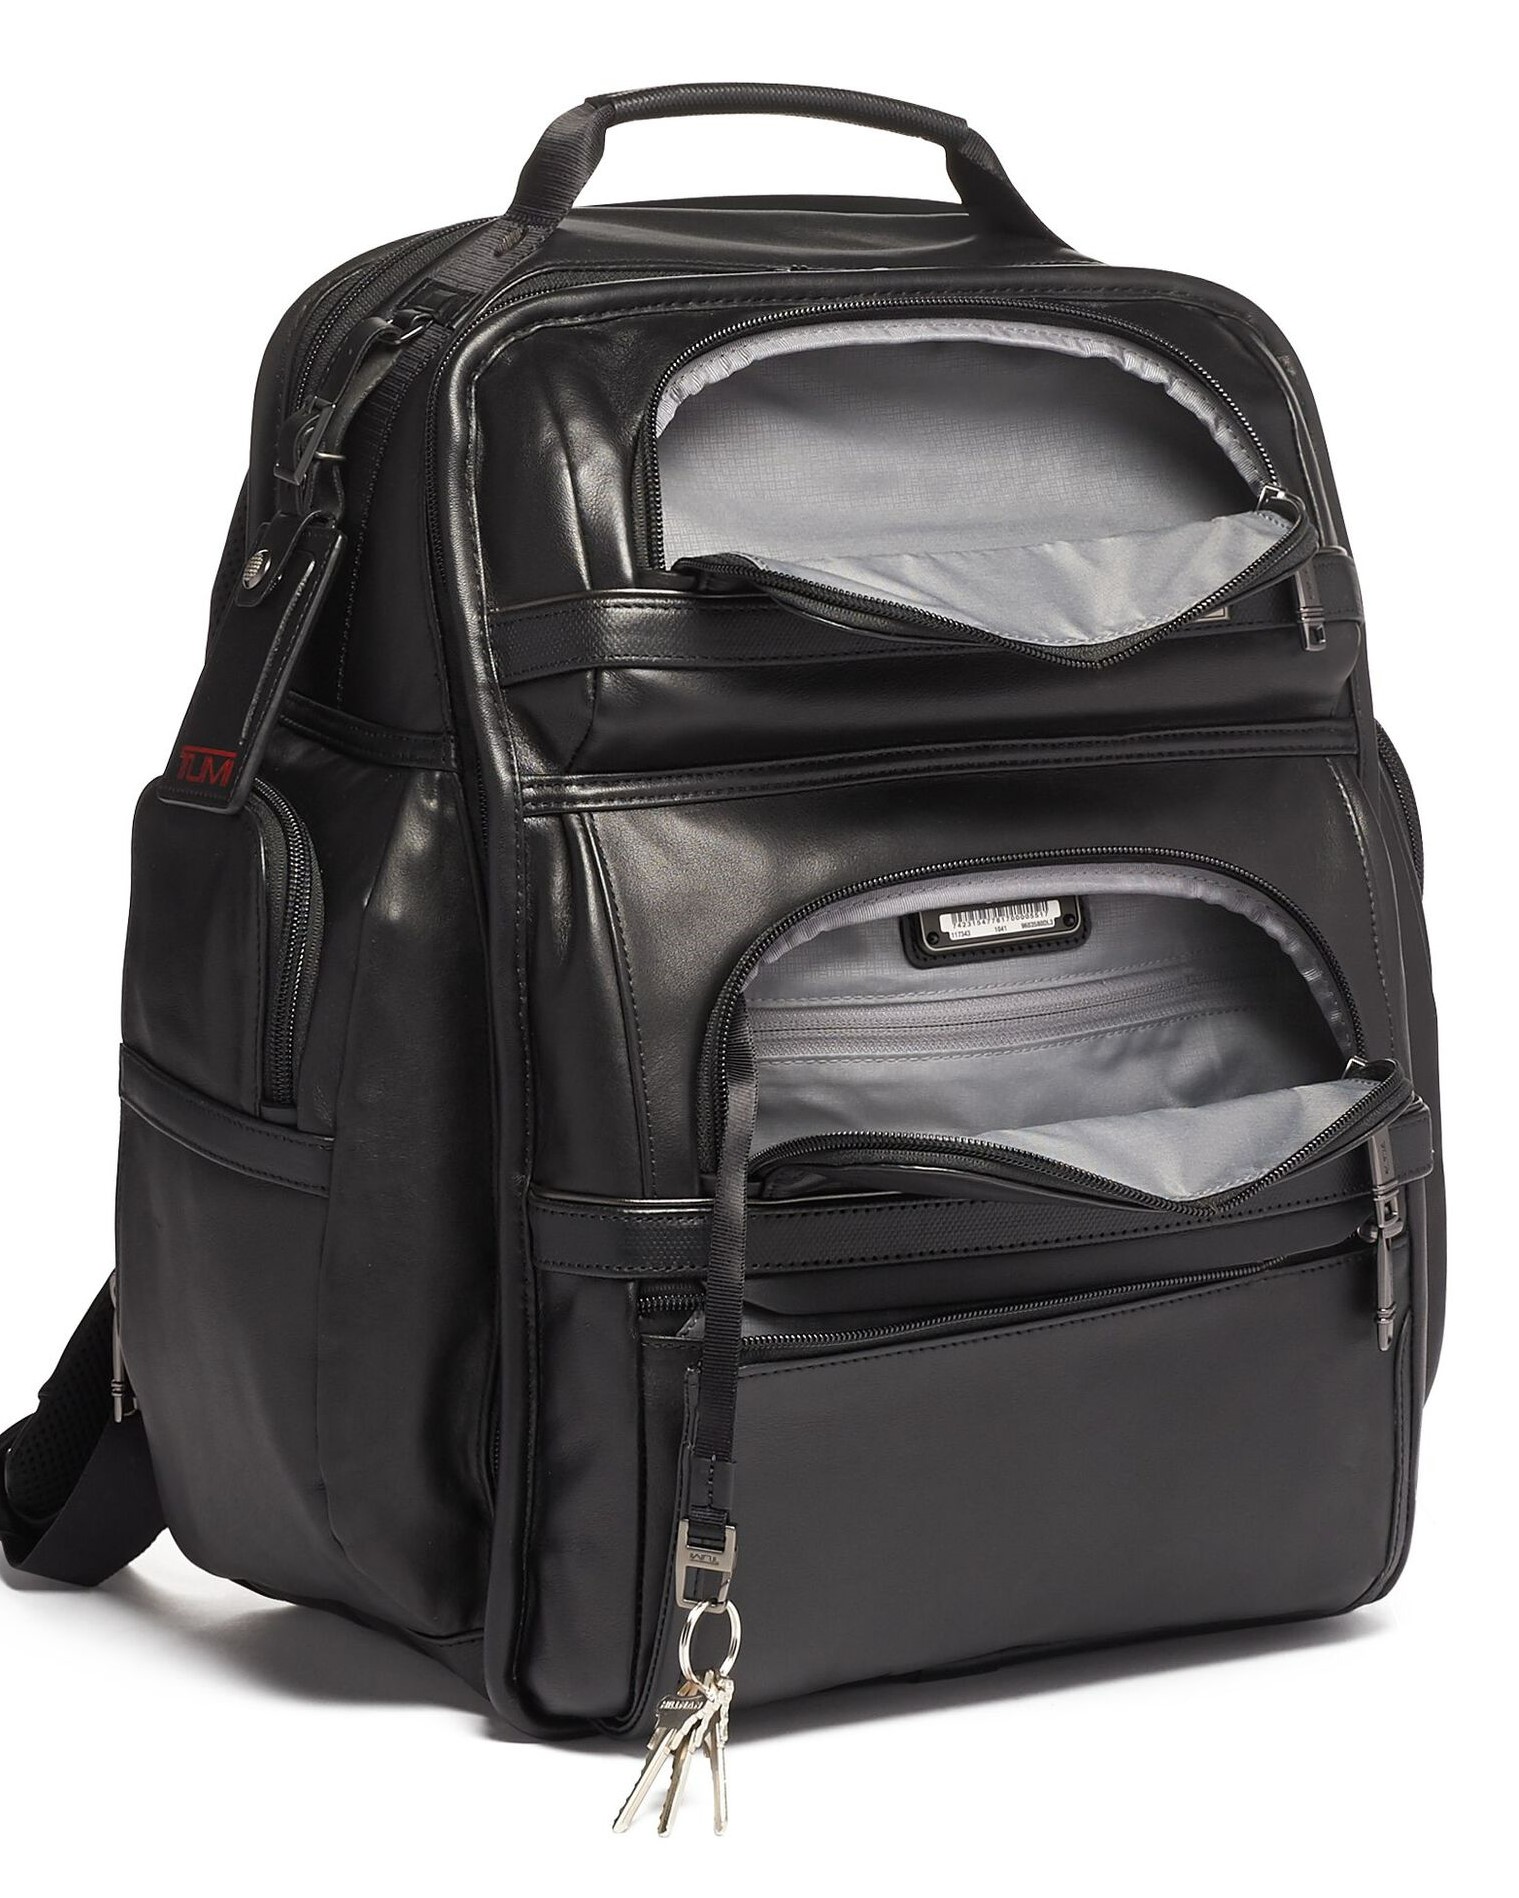 BALO DA NAM TUMI ALPHA 3 T-PASS BUSINESS CLASS BRIEF PACK LEATHER BACKPACK 6